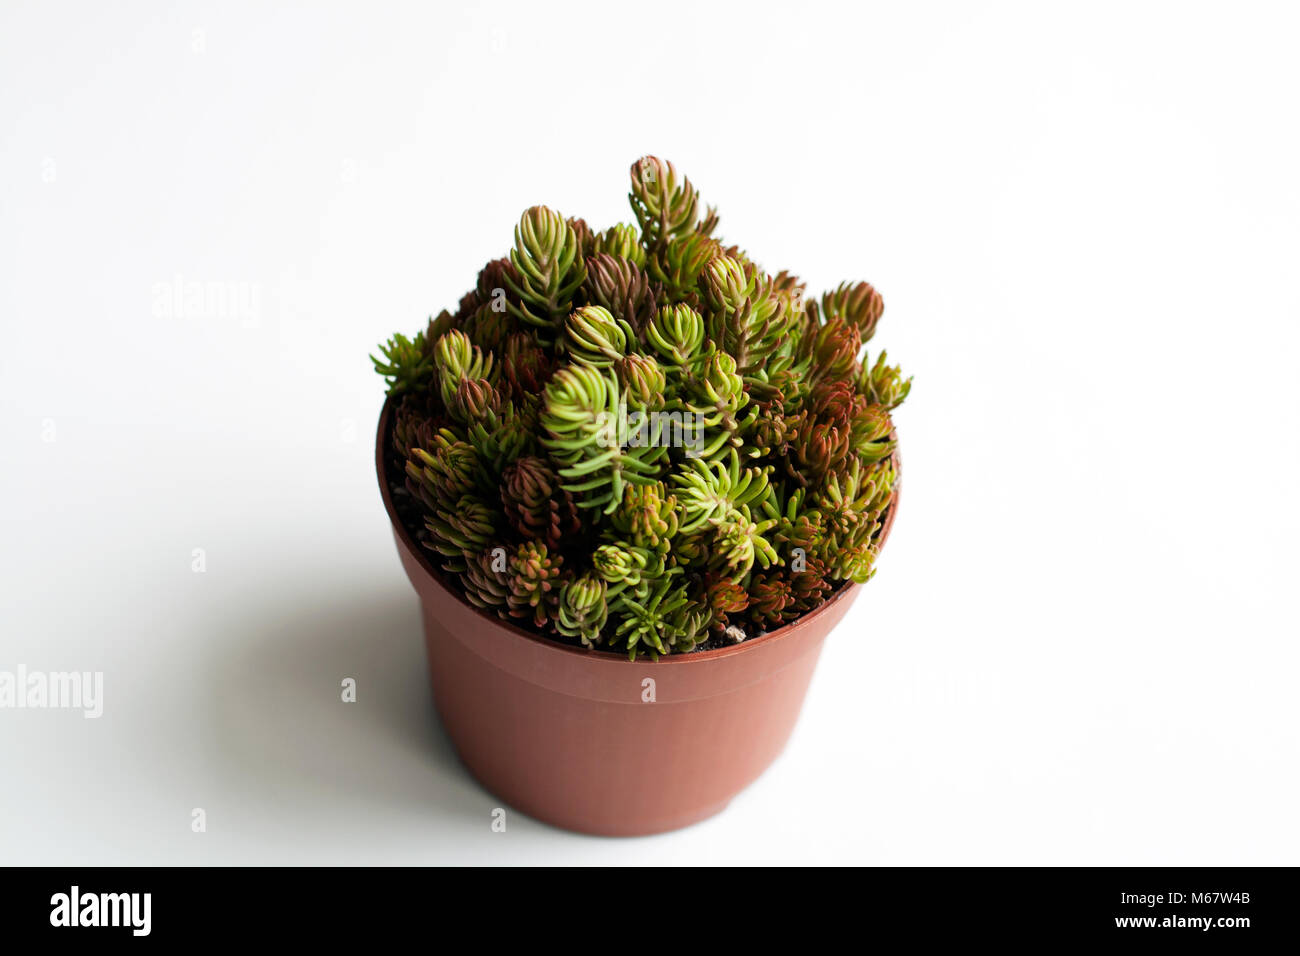 Sedum succulent sprouts potted in warm colors composition isolated on white background Stock Photo